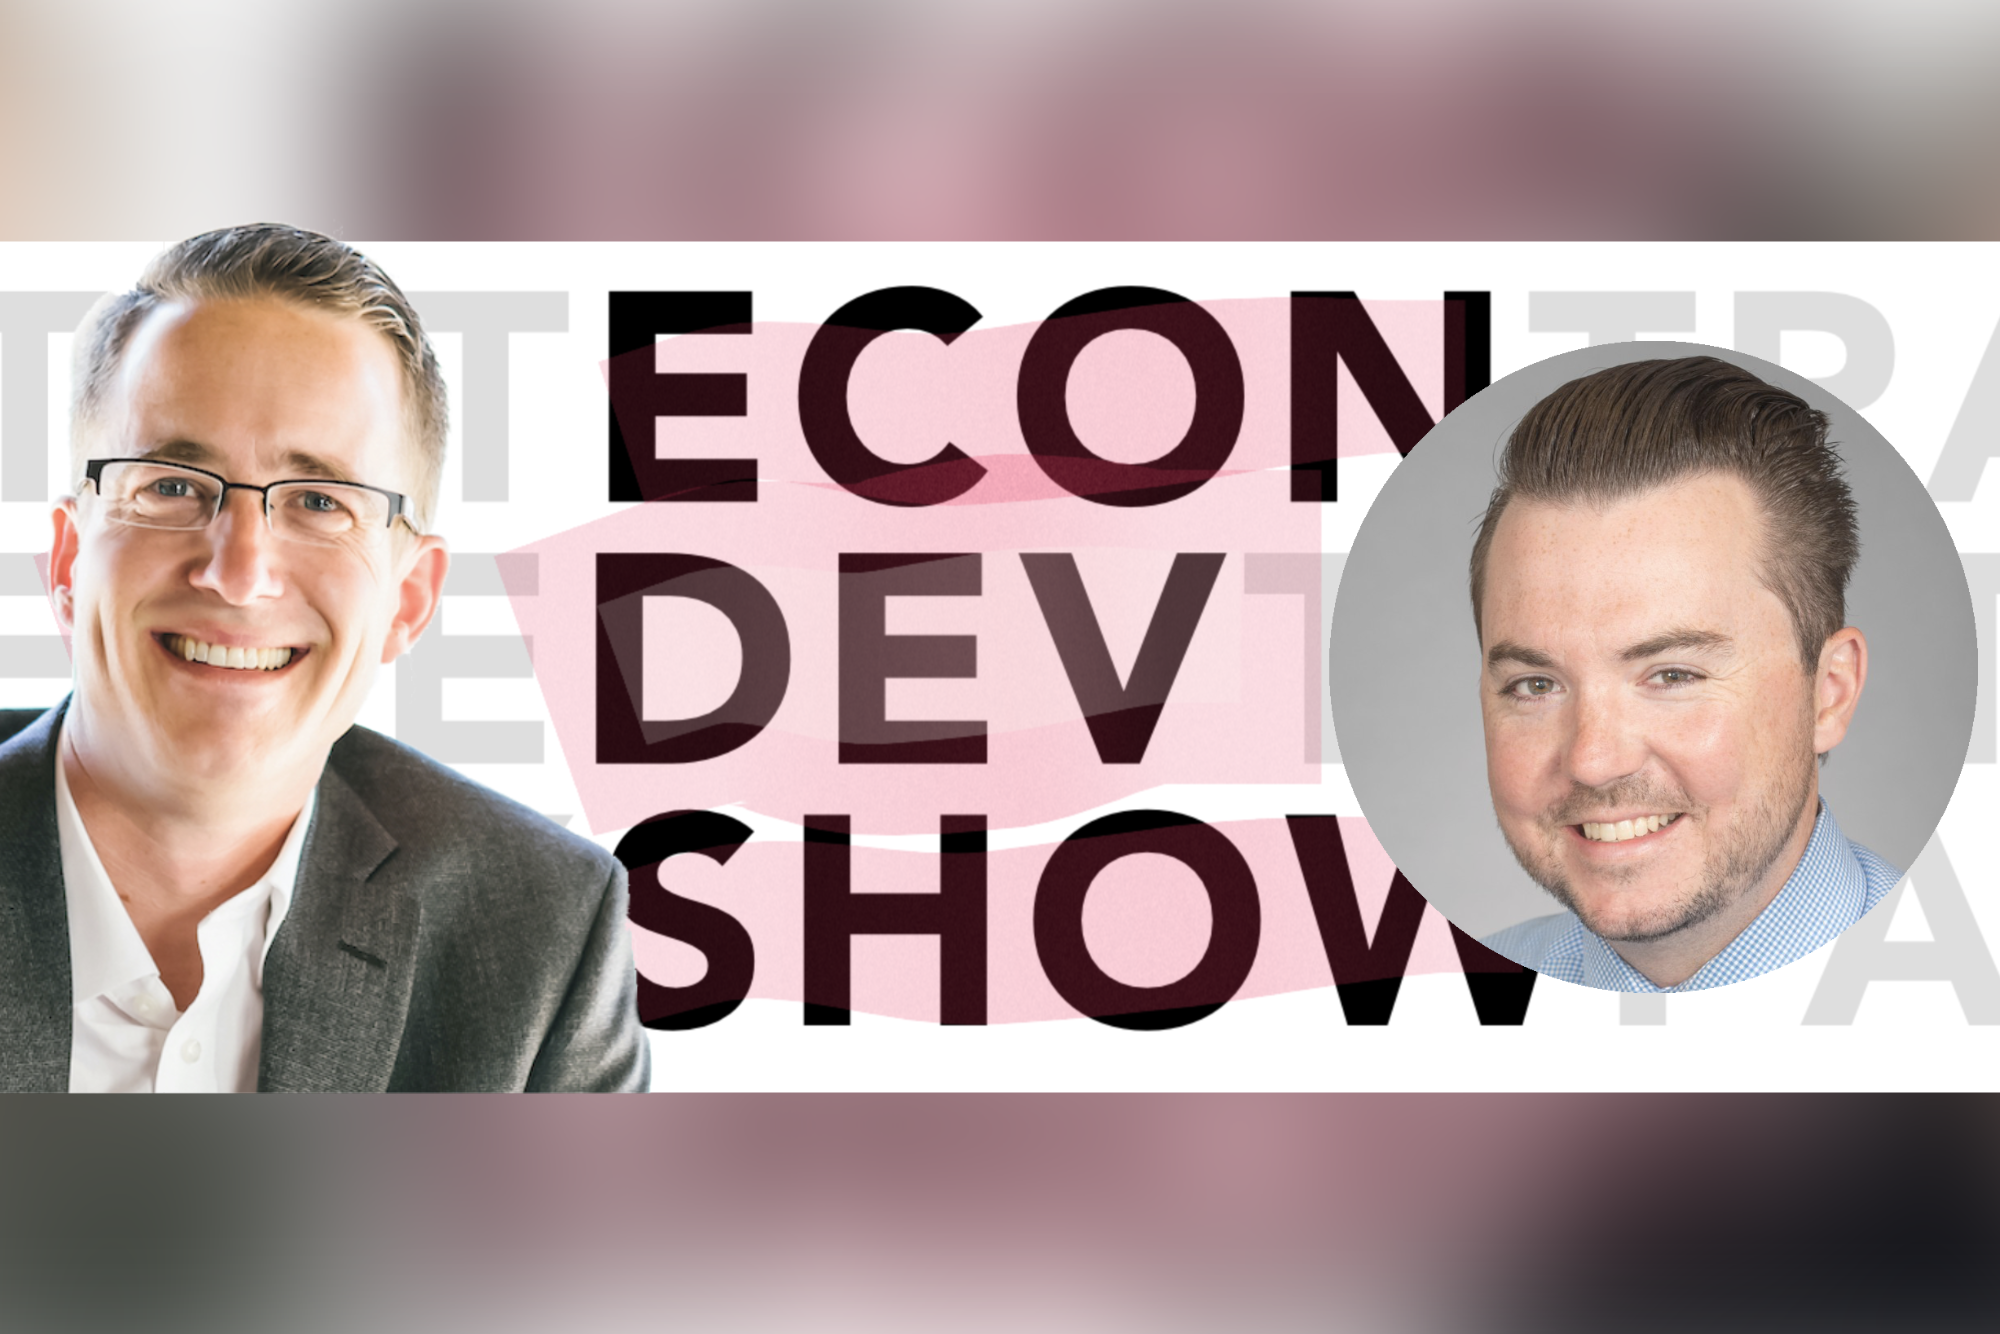 Podcast Episode 55 - Economic Development in Suburban Chicago with Kevin Leighty